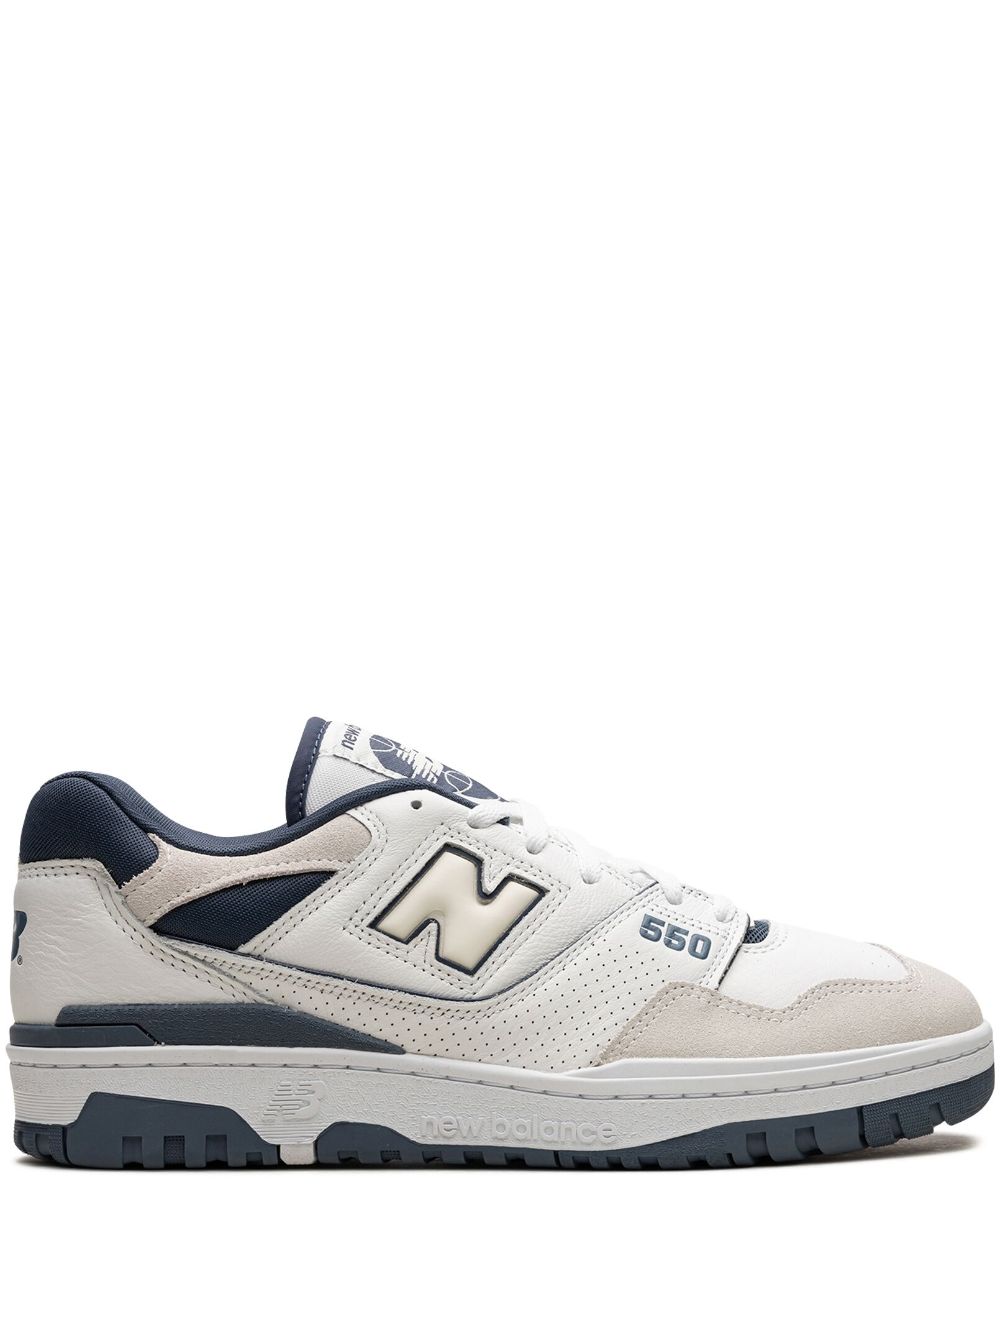 New Balance 550 low-top leather sneakers - Neutrals von New Balance